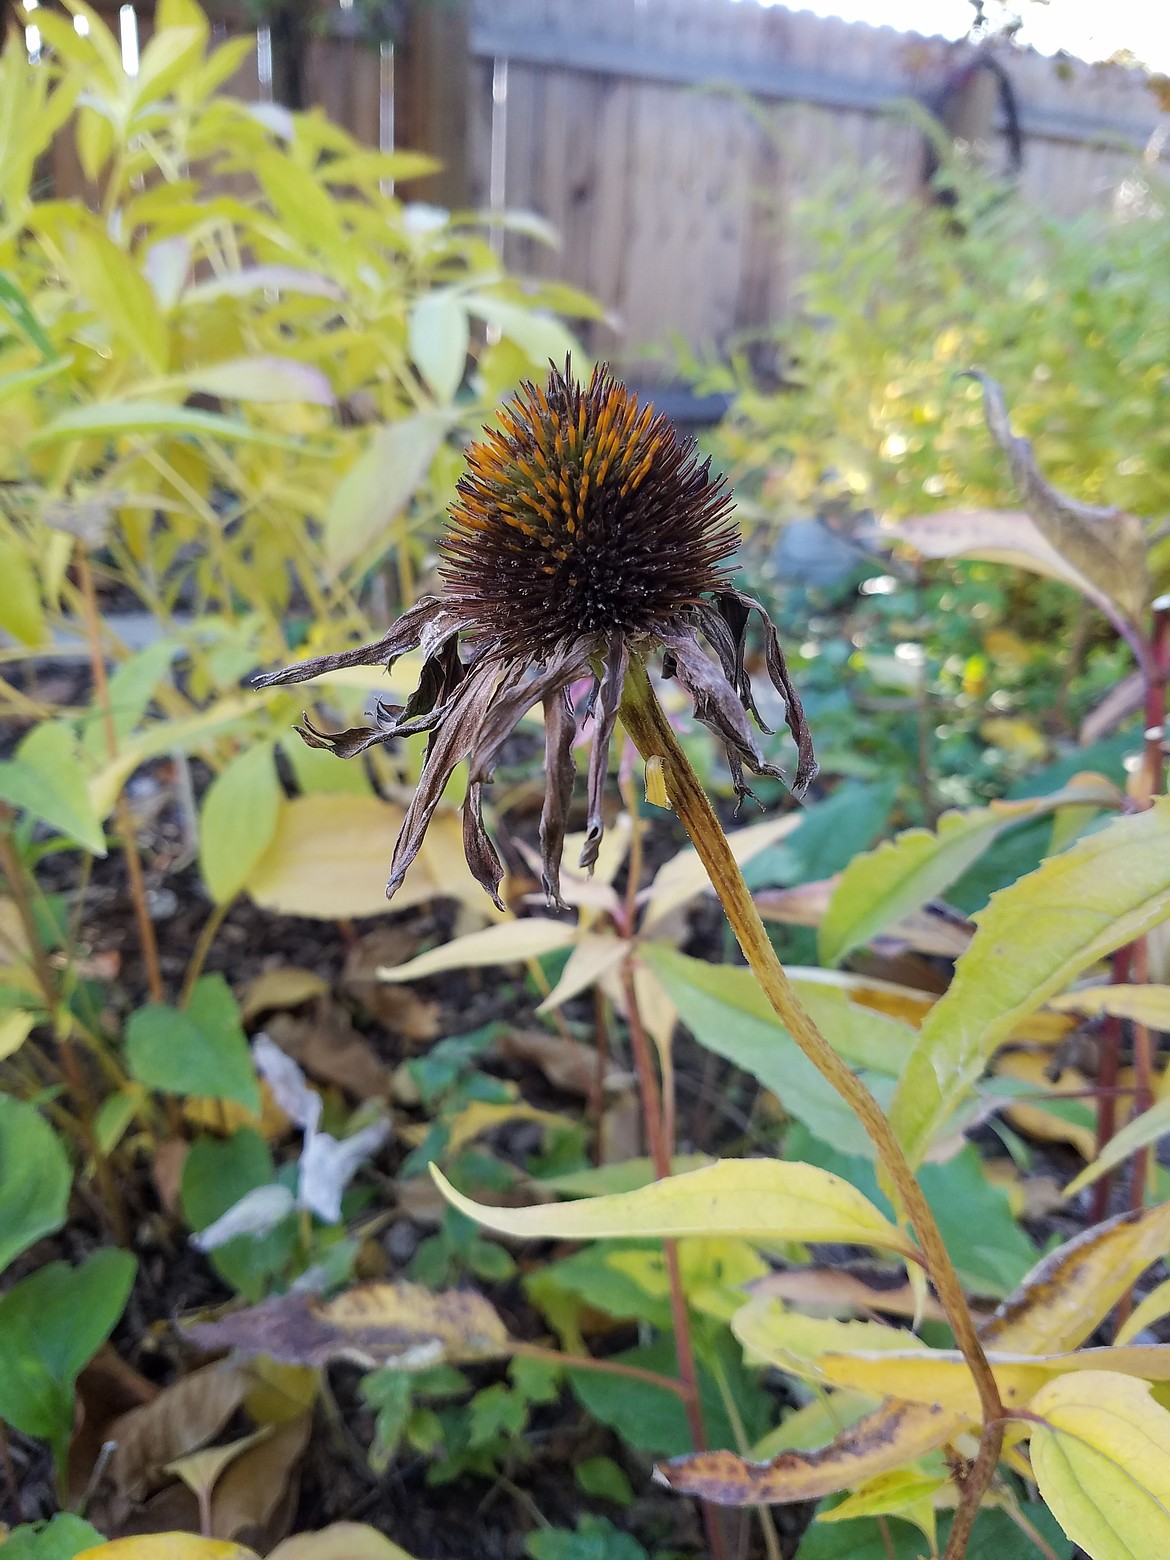 Leave some perennial plants standing, like these coneflowers. The seed heads provide food for birds over the winter.